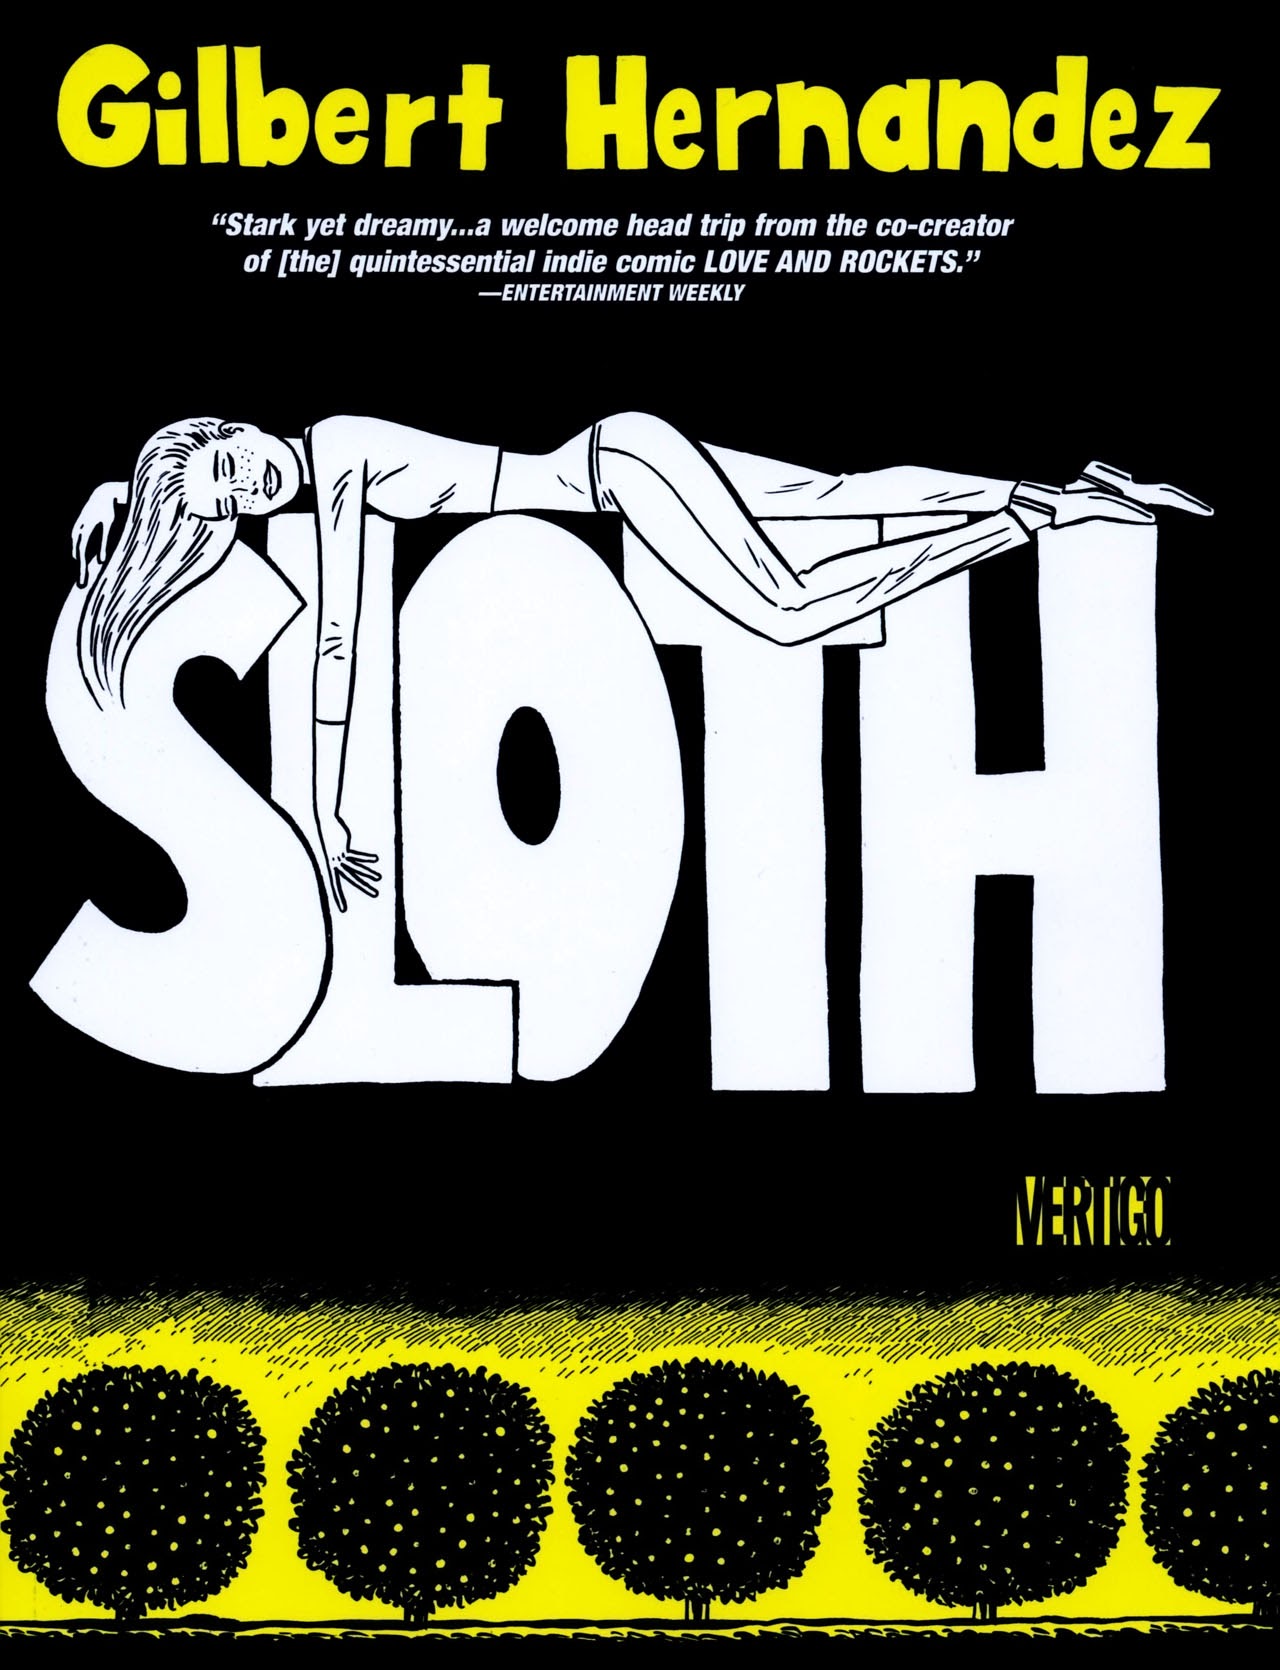 Read online Sloth comic -  Issue # TPB - 1